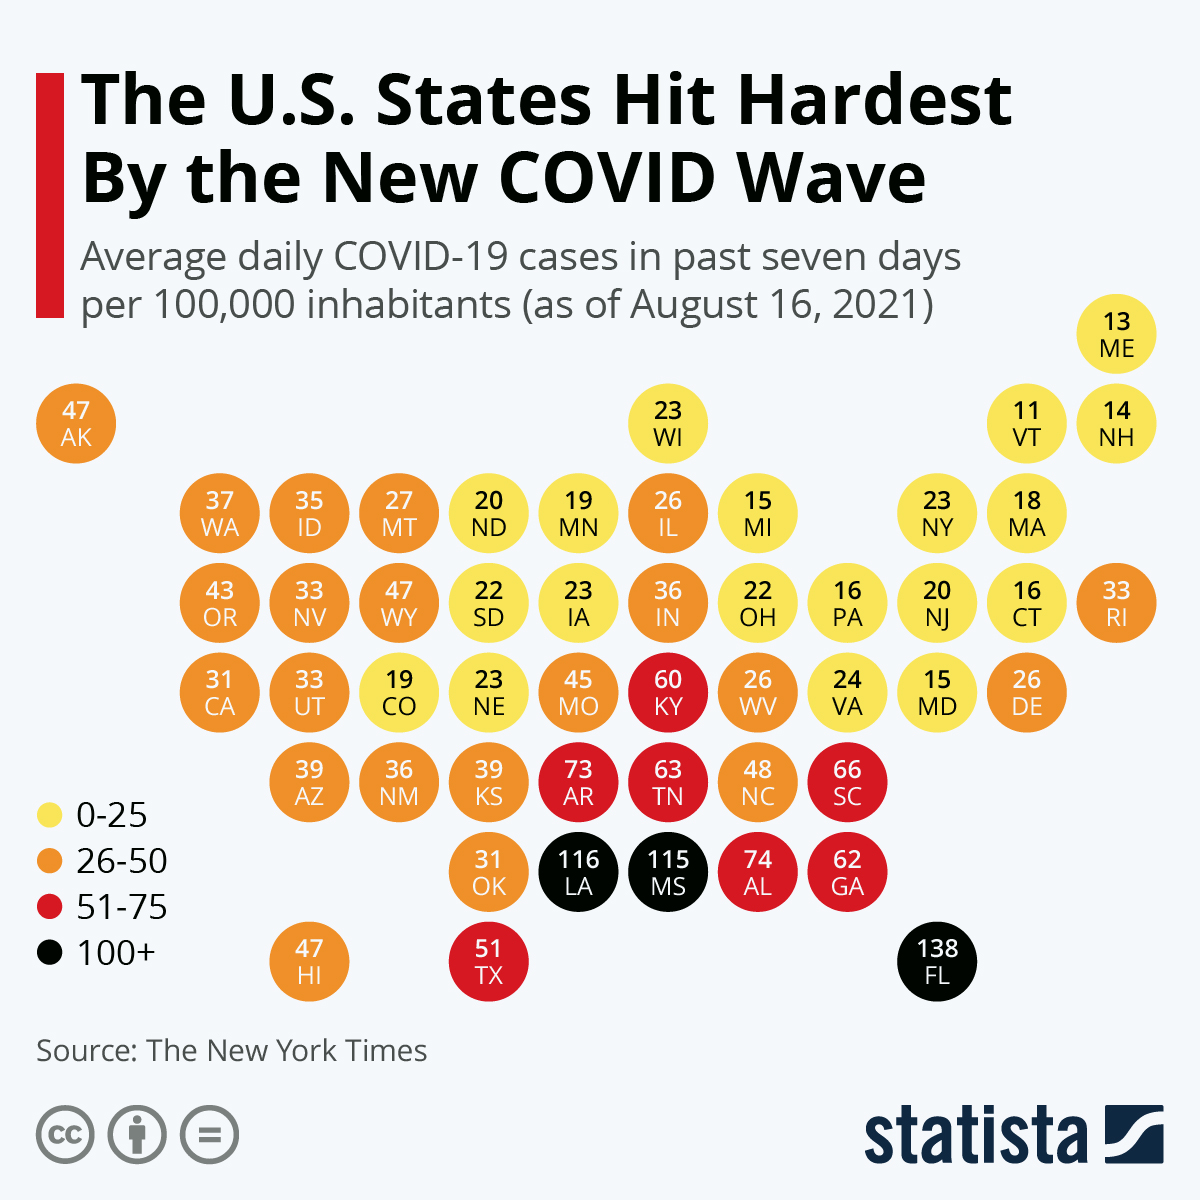 The U.S. States Hit Hardest By the New COVID Wave